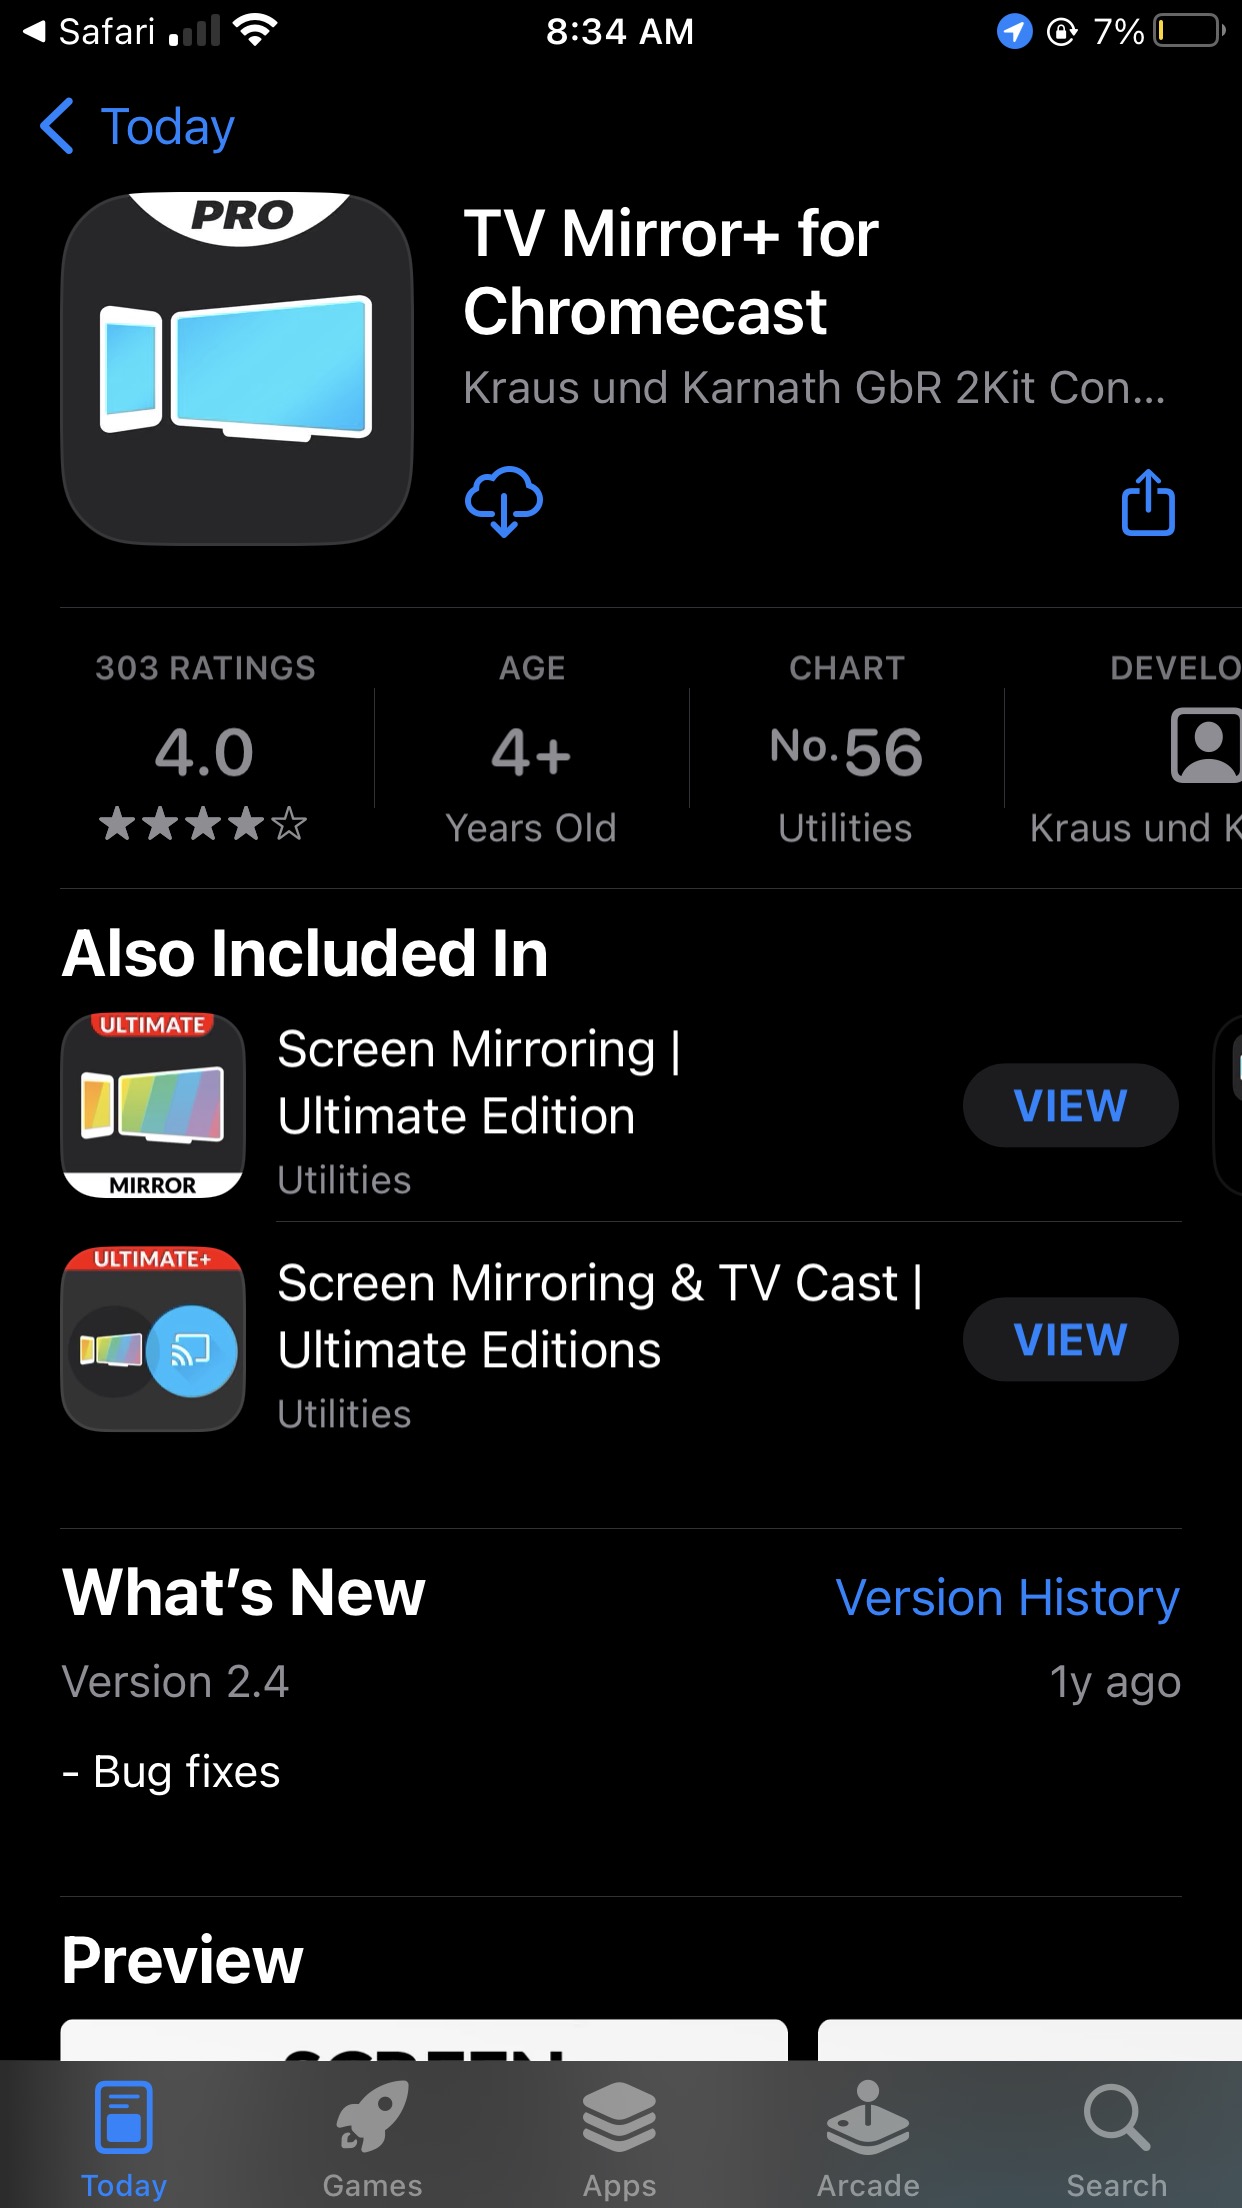 Download TV Mirror+ from the App Store